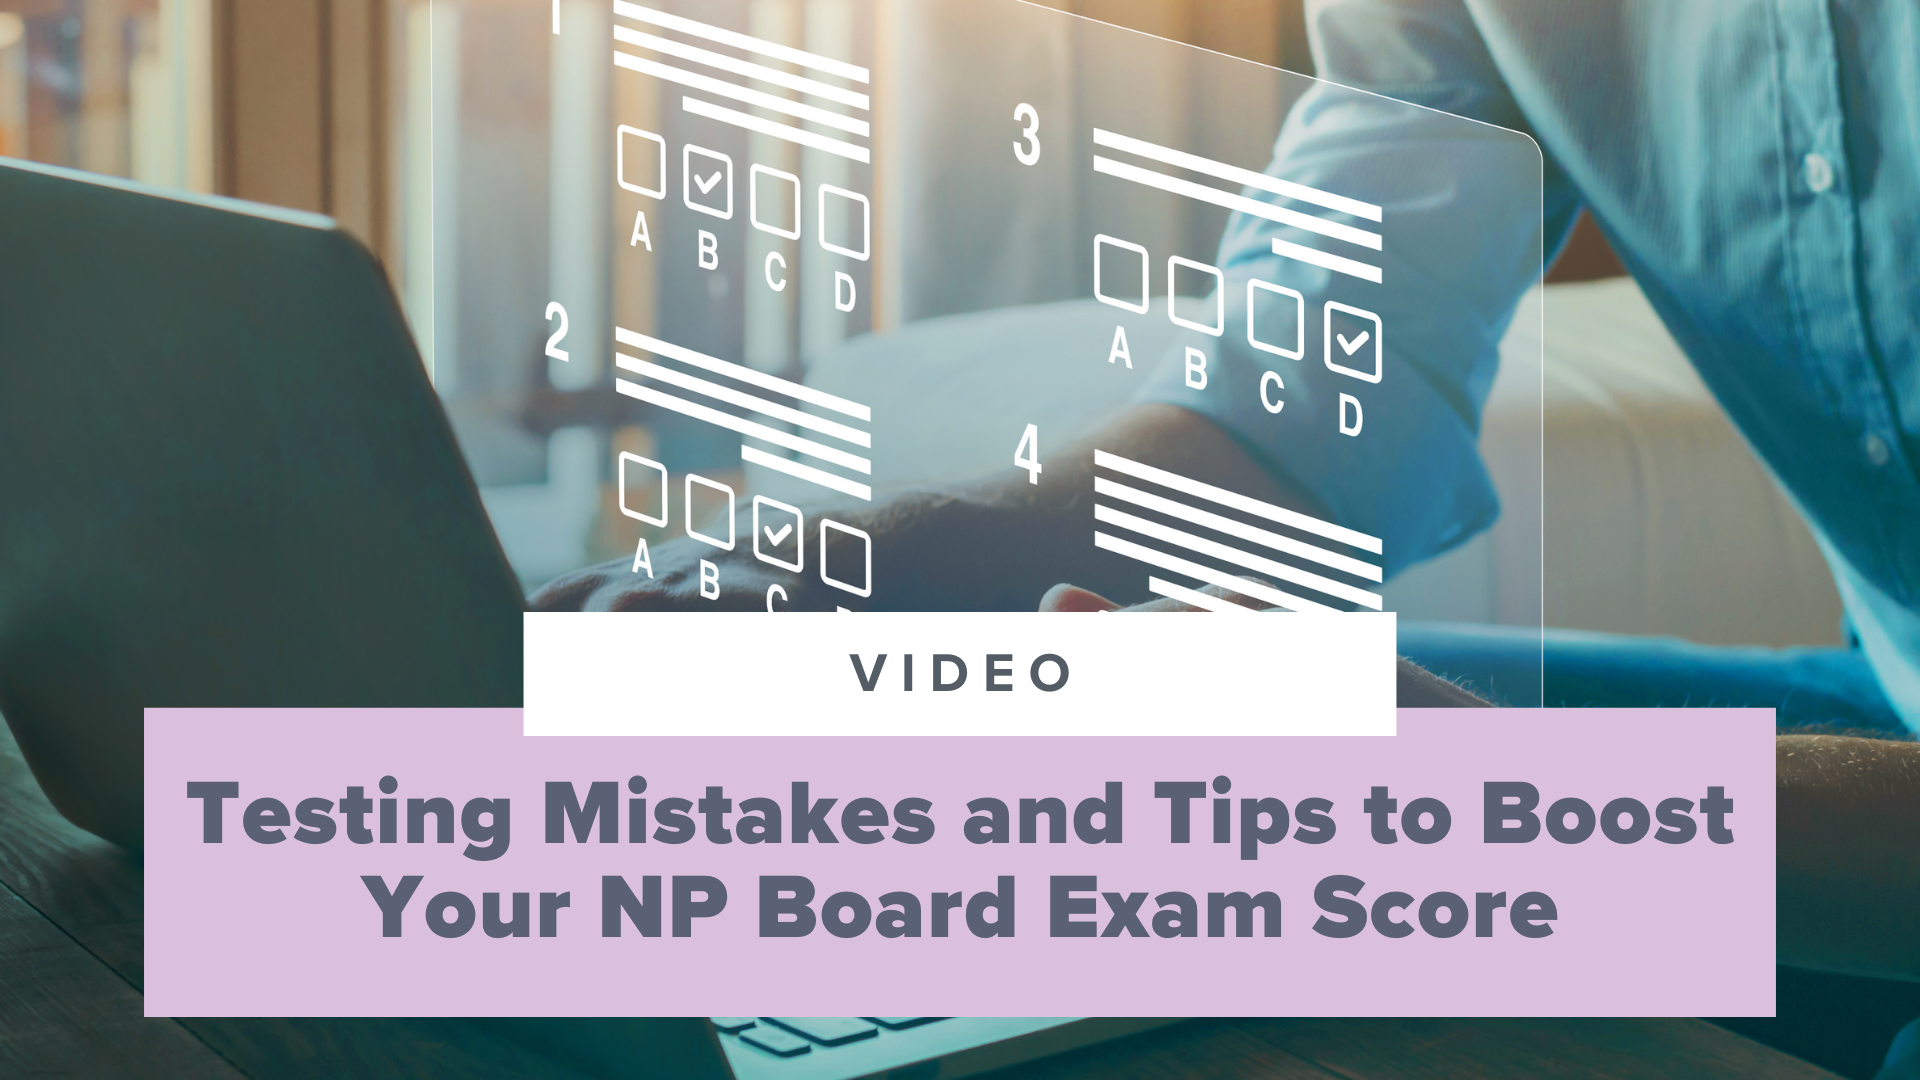 SMNP Blog - Testing Mistakes and Tips to Boost Your NP Board Exam Score